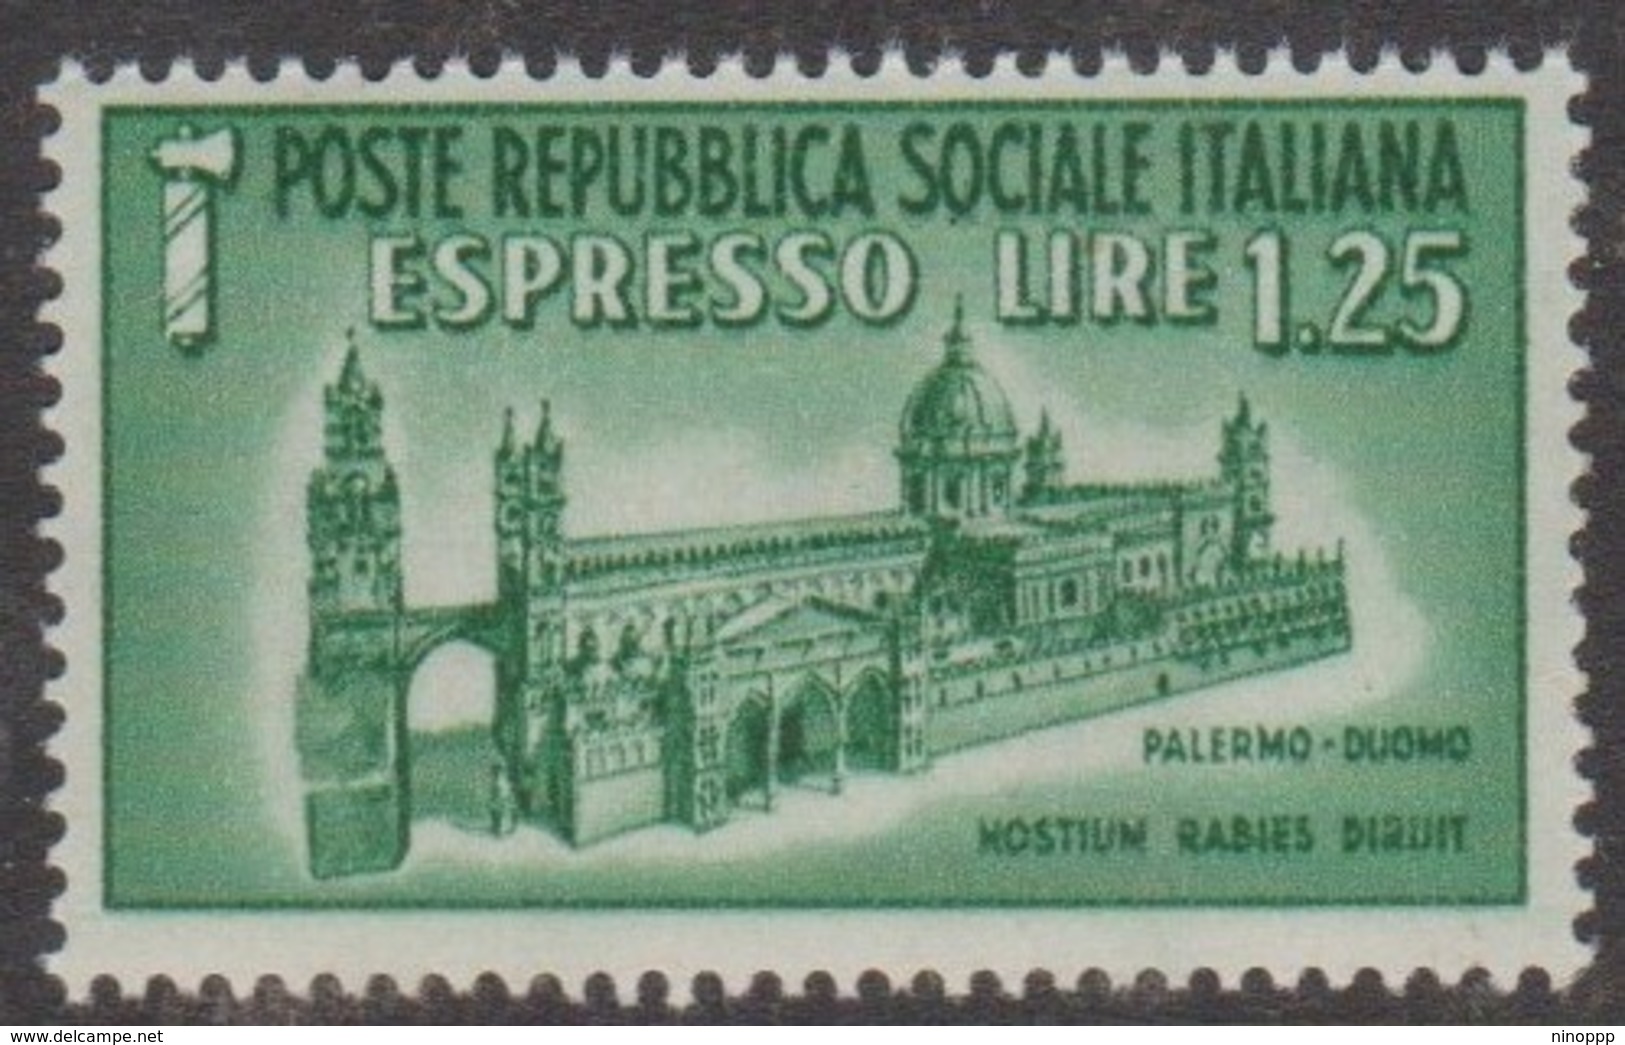 Italy Repubblica Sociale Italiana E 10 1944 Special Delivery Lire 1.25 Green Palerme Dome, Mint Never Hinged, - Exprespost